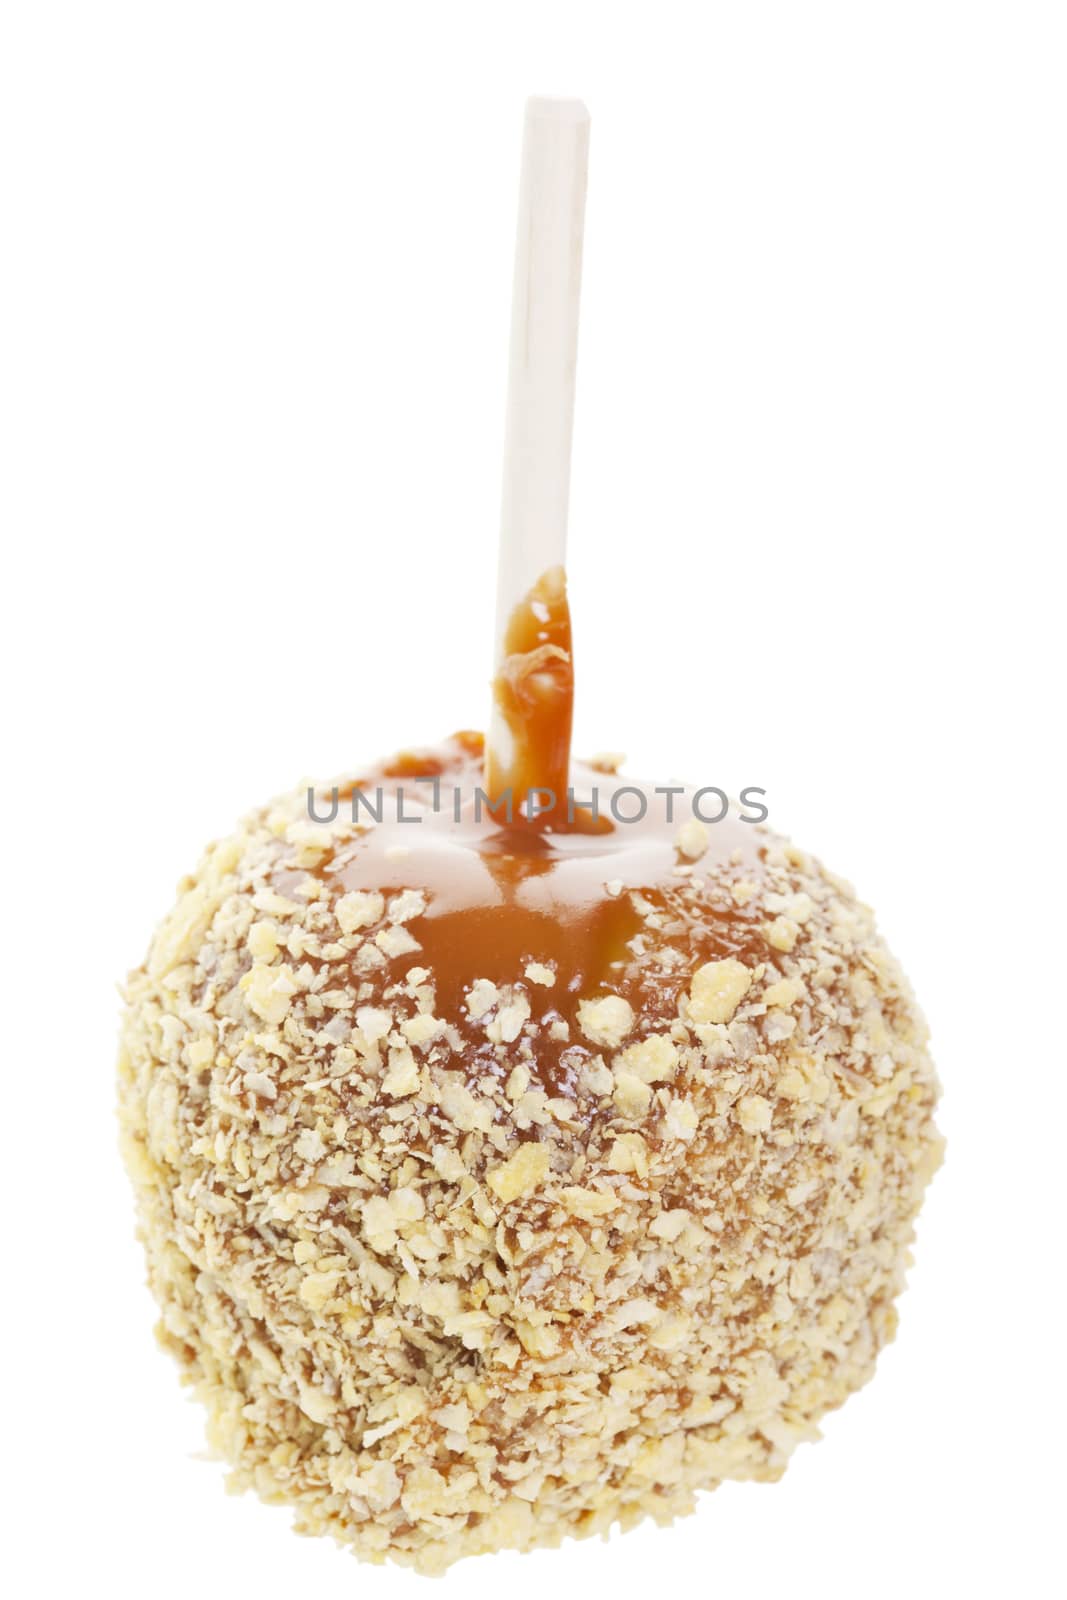 Caramel covered candy apple rolled in crush peanut.  Shot on white background.